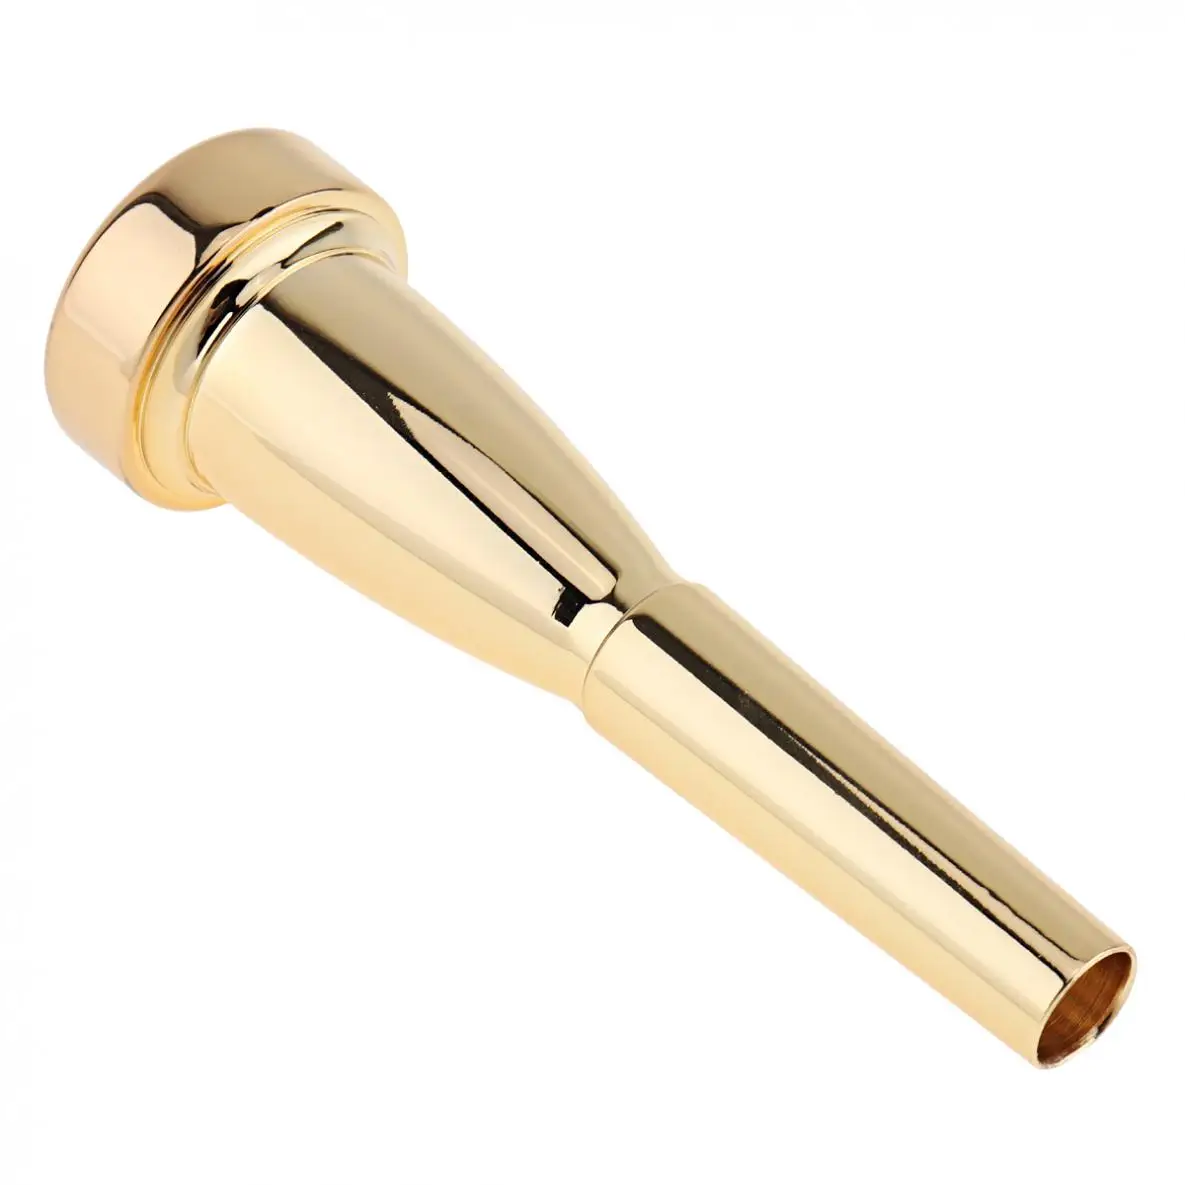 

3C 5C 7C Gold Plated Metal Durable Trumpet Mouthpiece Bullet Shape for Yamaha Bach Conn and King Trumpets Accessories